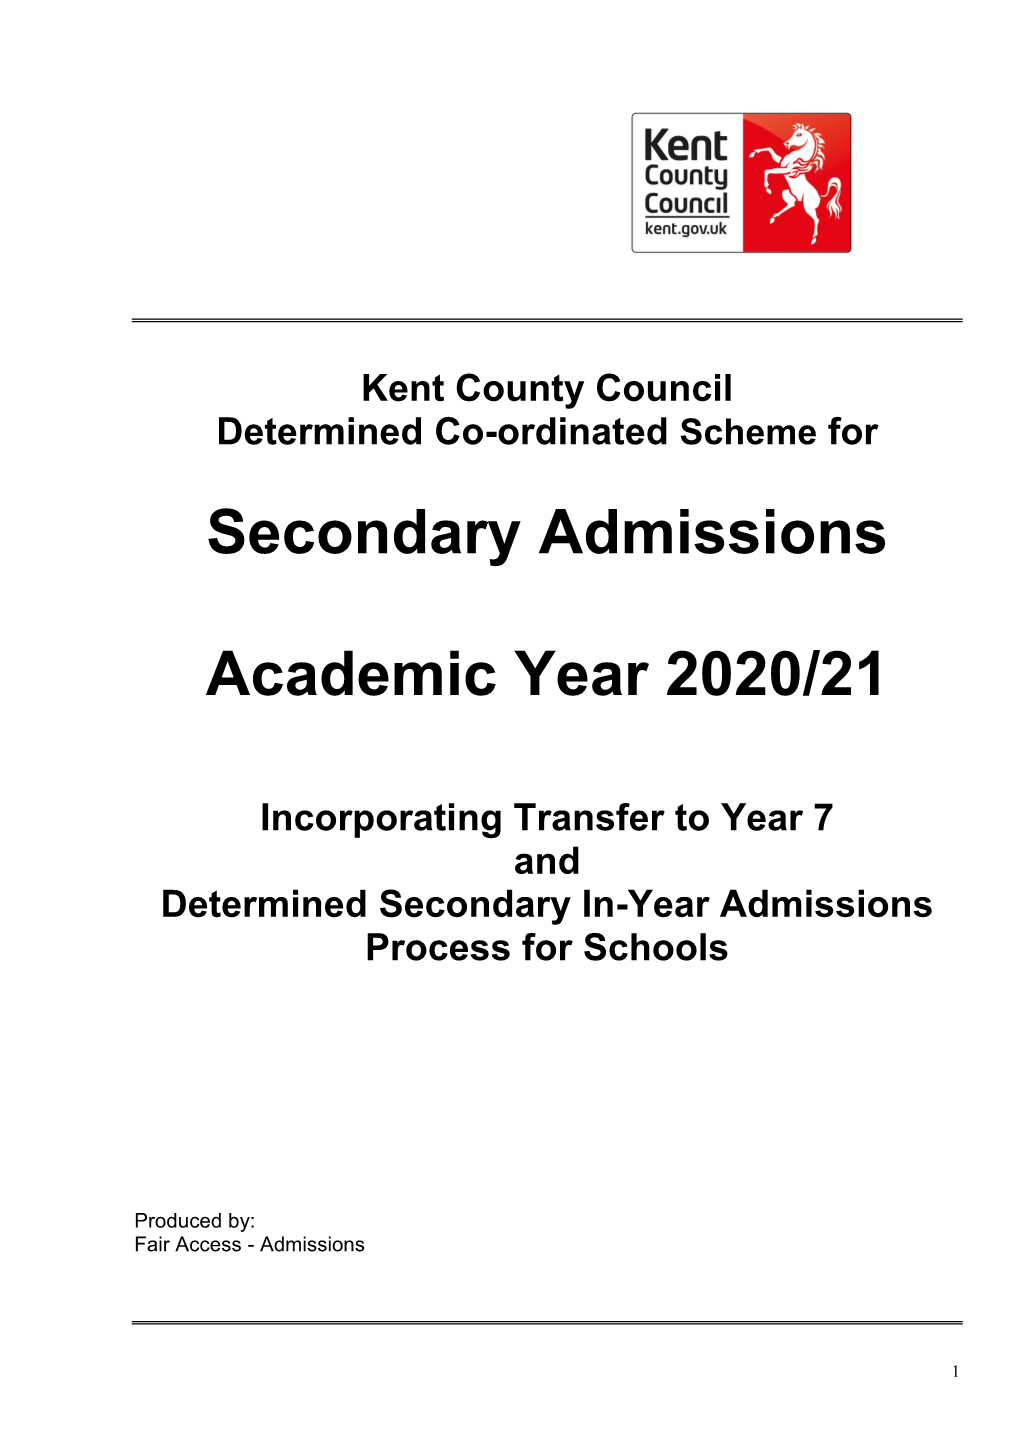 Secondary Admissions Academic Year 2020/21